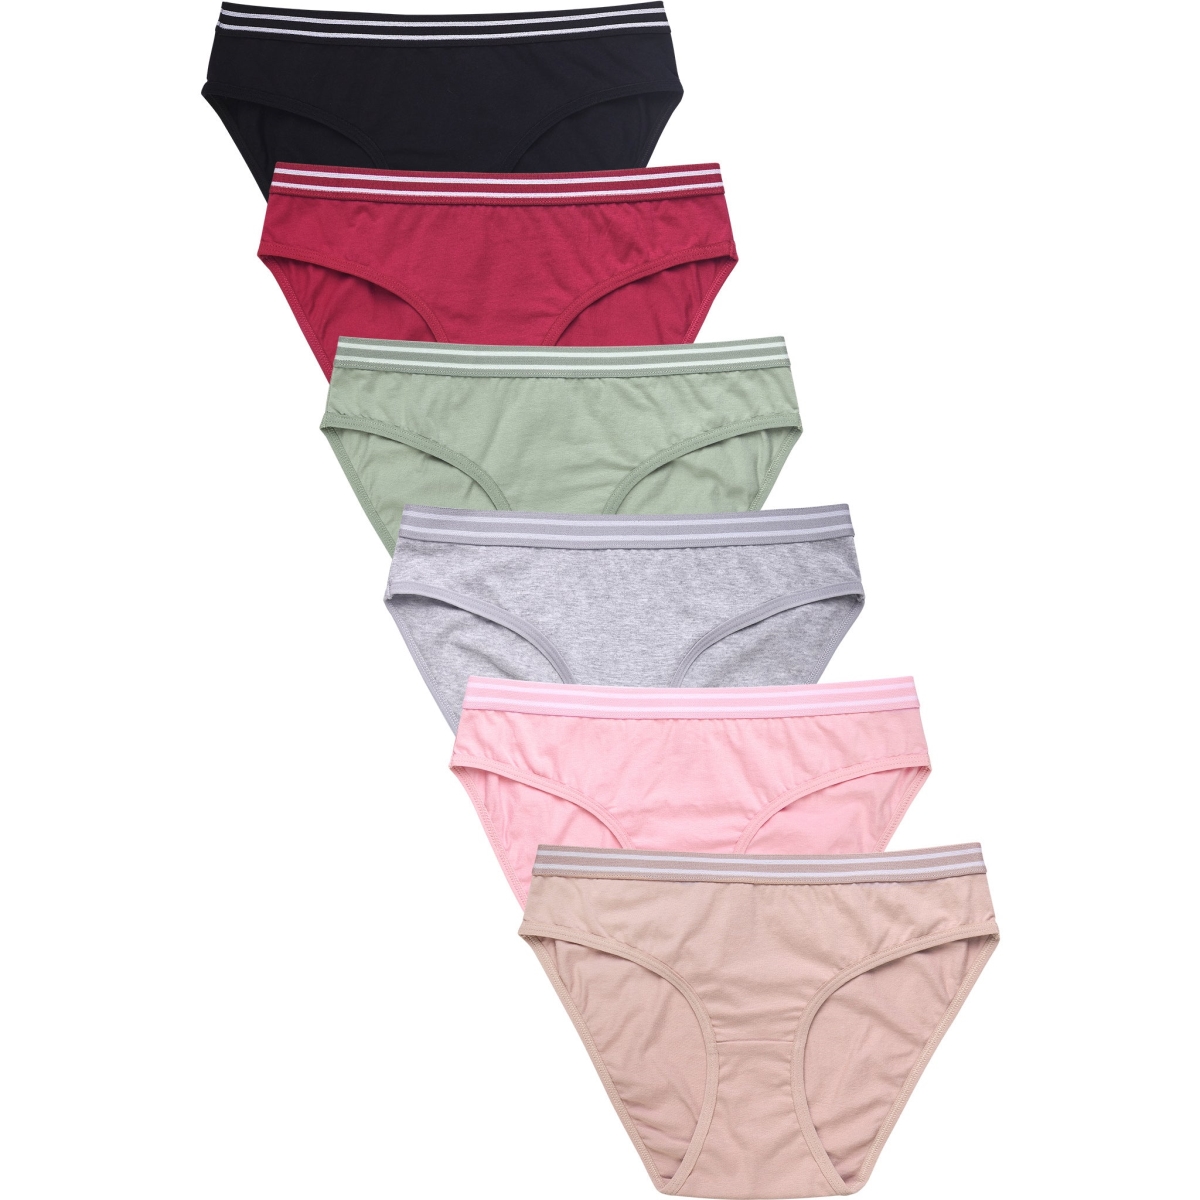 Picture of 247 Frenzy 247-LP1361CK4-SM Sofra Womens Essentials Cotton Stretch Bikini Panty Underwear - Assorted Color - Small - Pack of 6